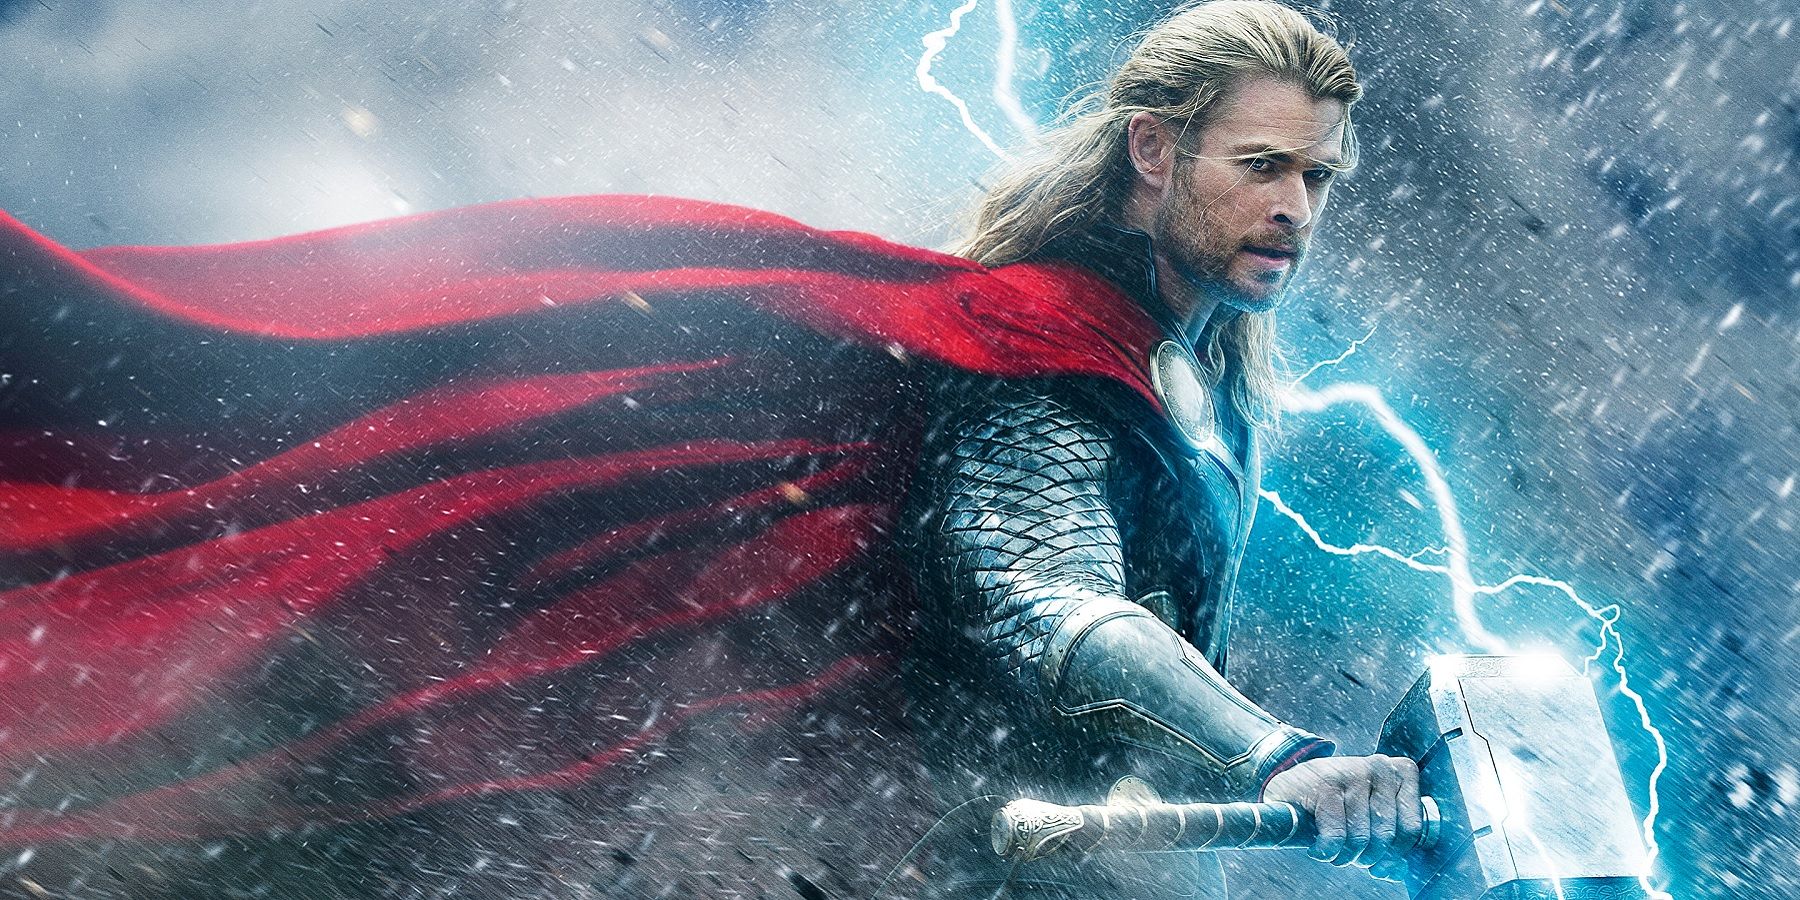 Thor holding Mjolnir and casting thunder with it in Thor: The Dark World.